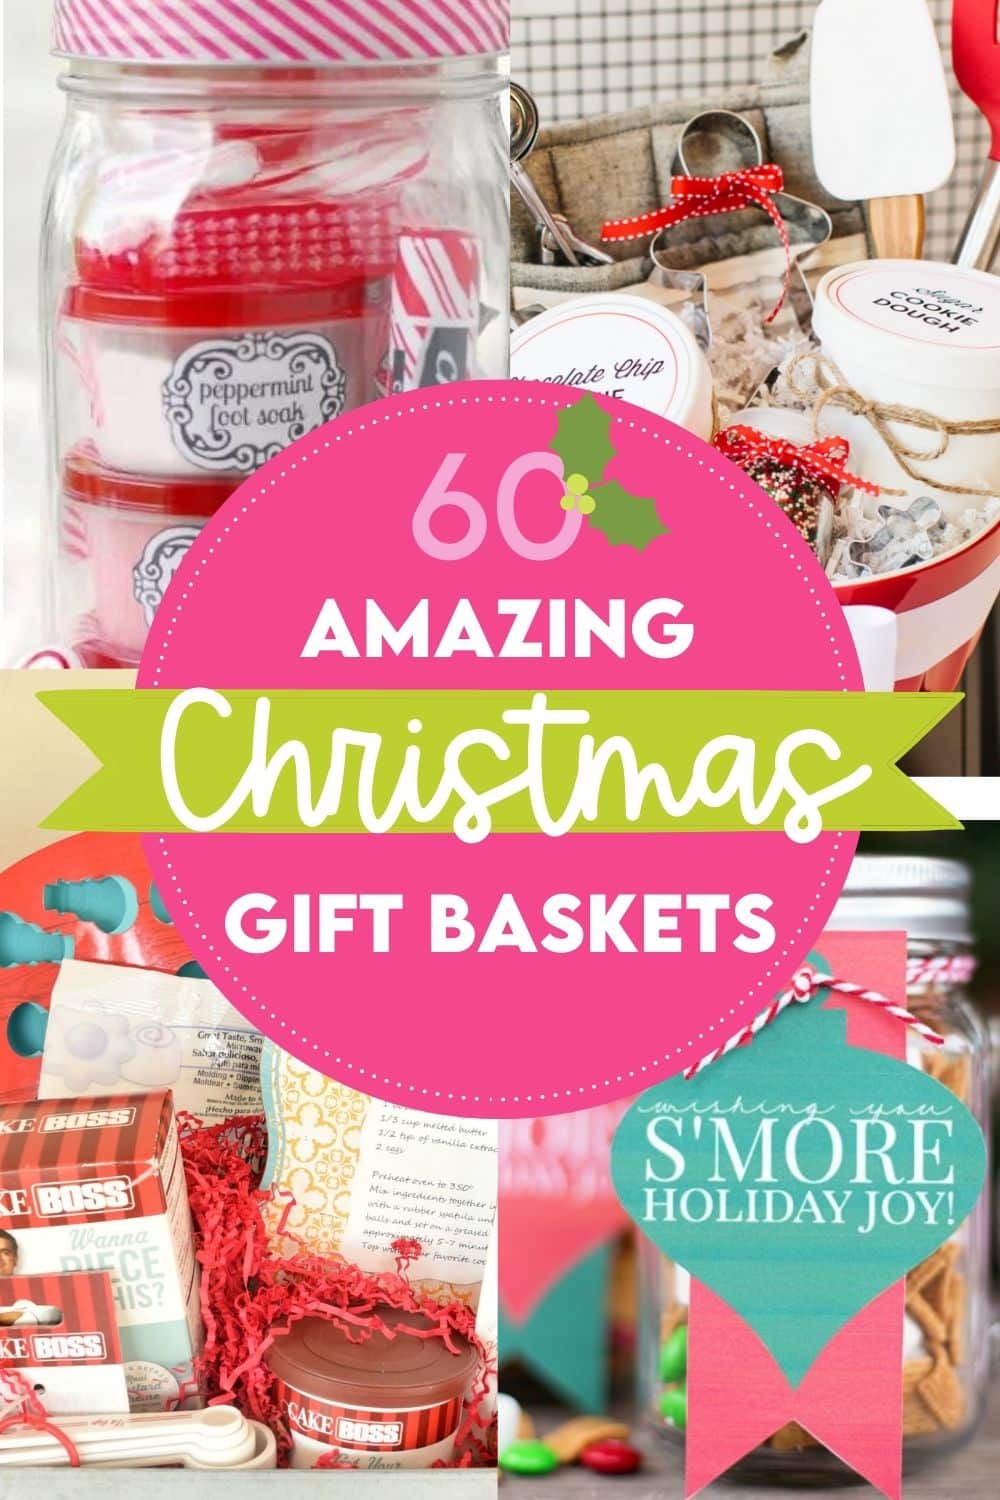 Gift Basket Ideas - The Ultimate List of DIY Gift Baskets